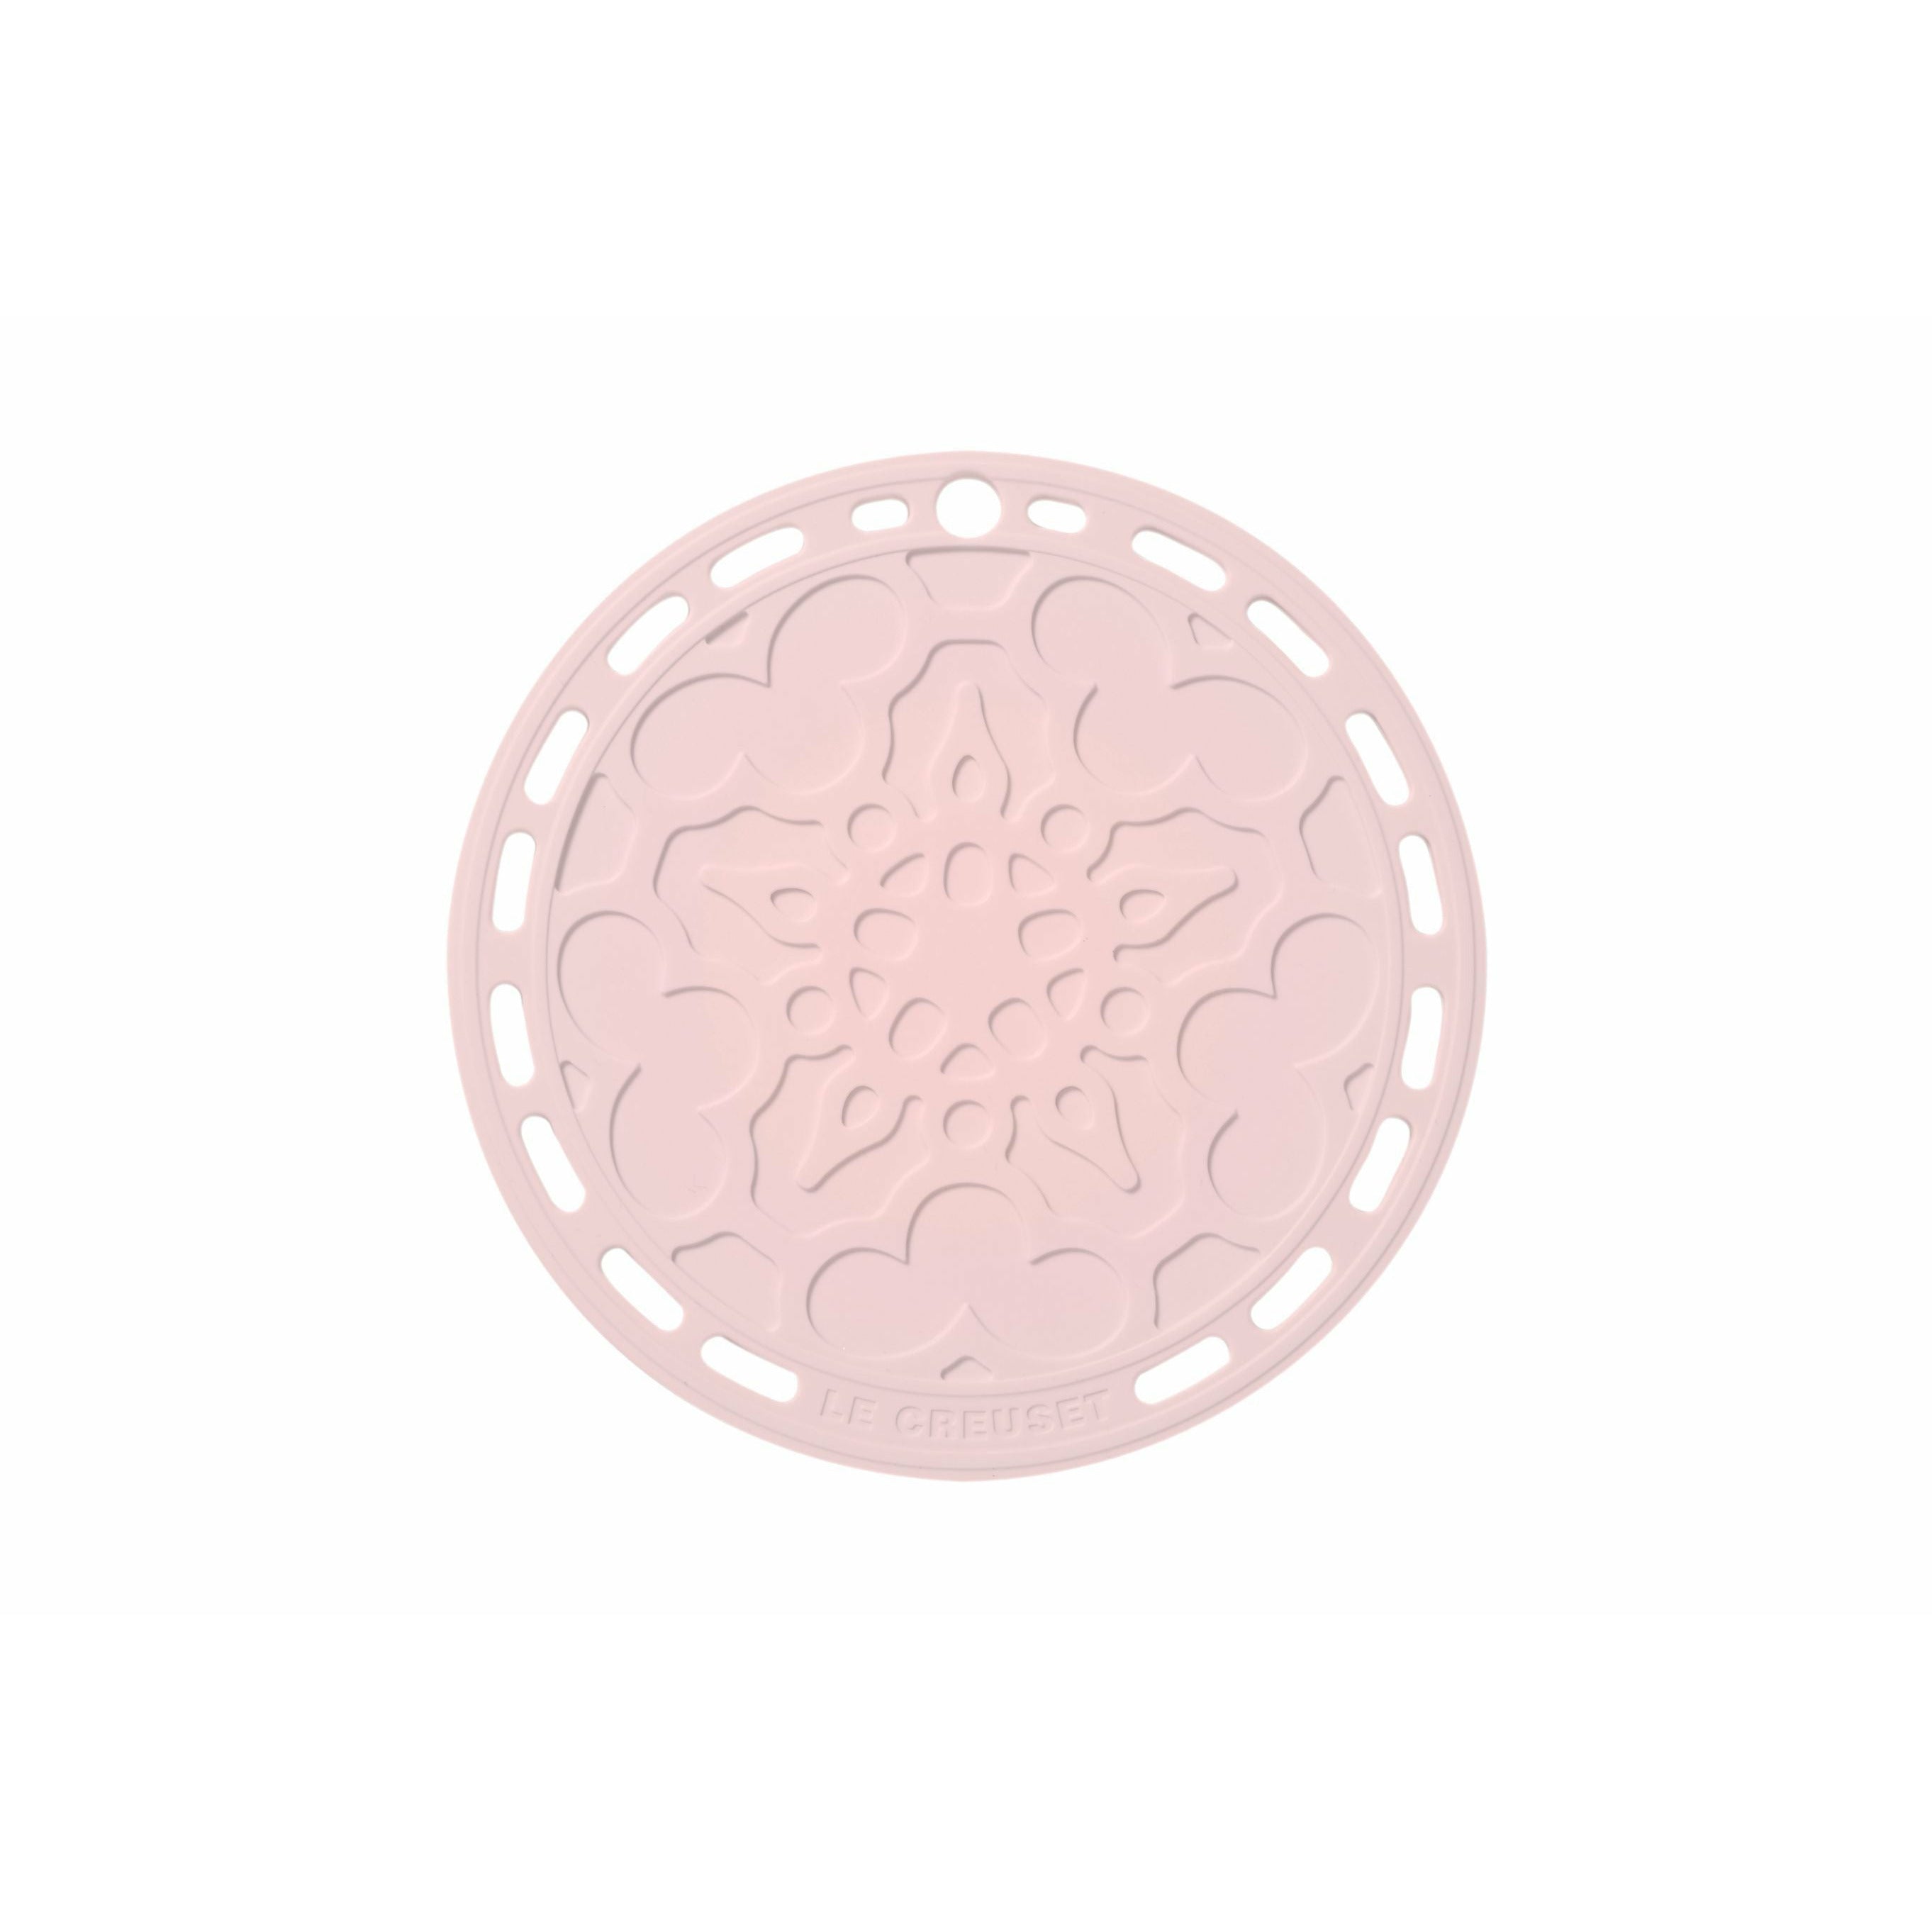 Le Creuset Silicone Coaster Tradition, Pink